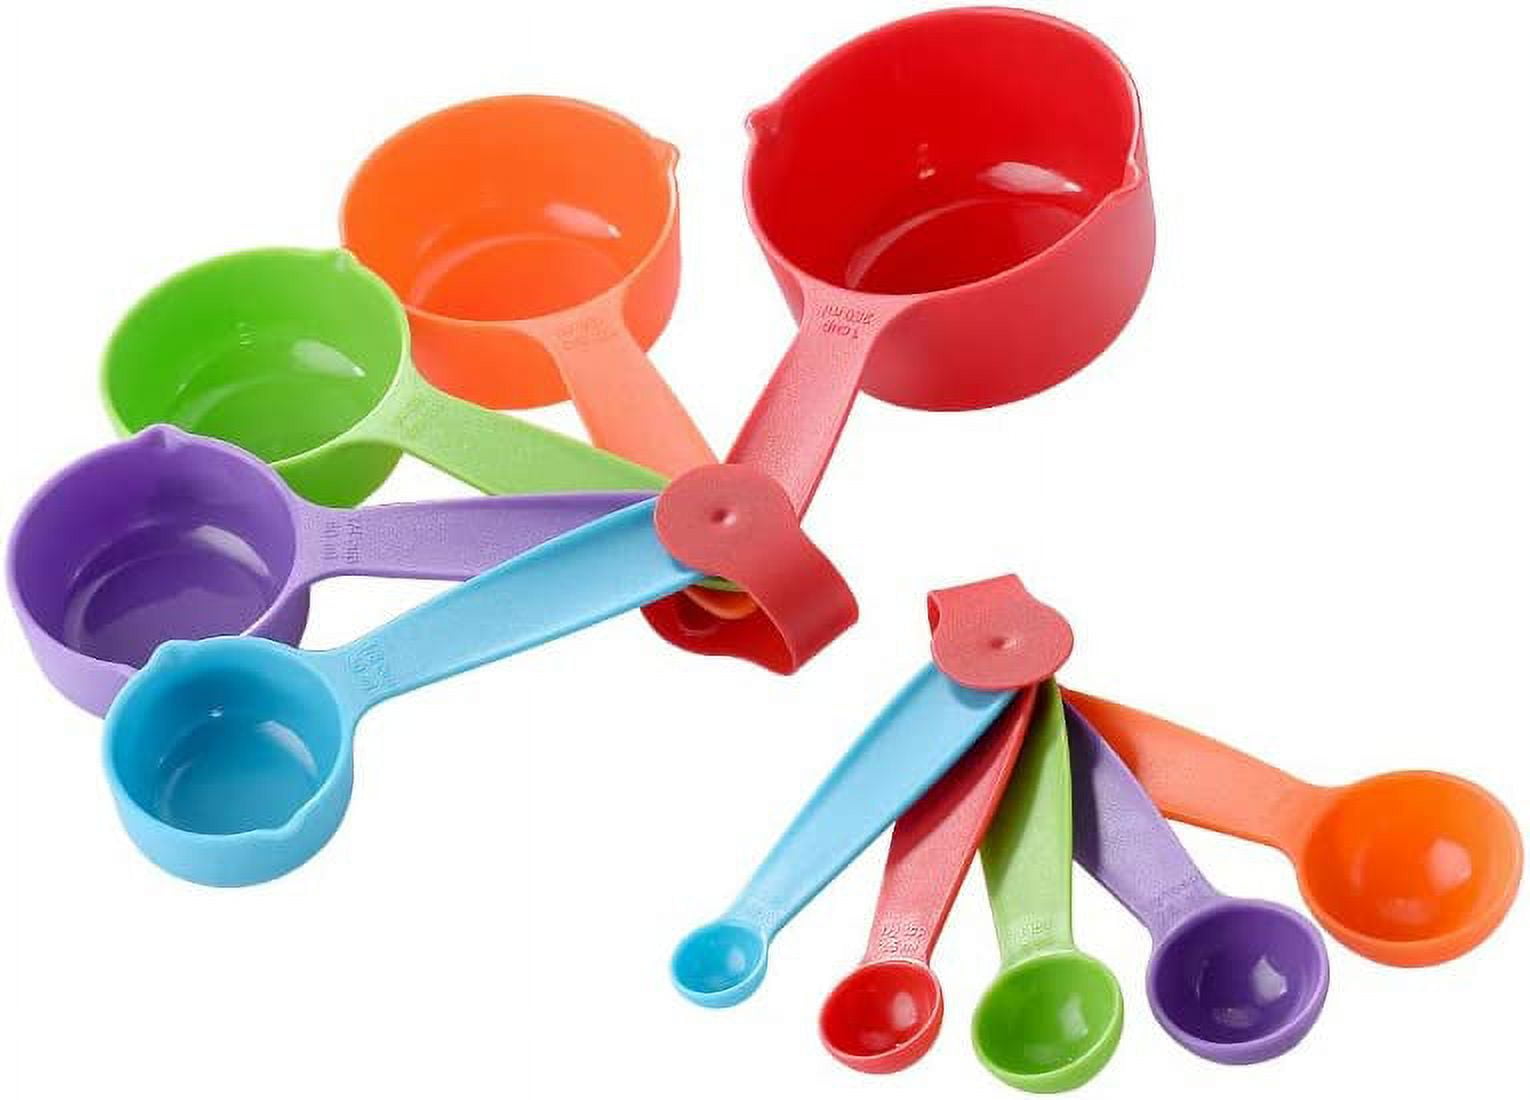  Viwehots Measuring Cups and Spoons Set, Plastic Measuring Cup  Set, Measuring Spoons and Cups Set 15, Dry Measuring Cups Set, Plastic Measuring  Cups and Spoons Set, Color 3/4 Measuring Cup Purple